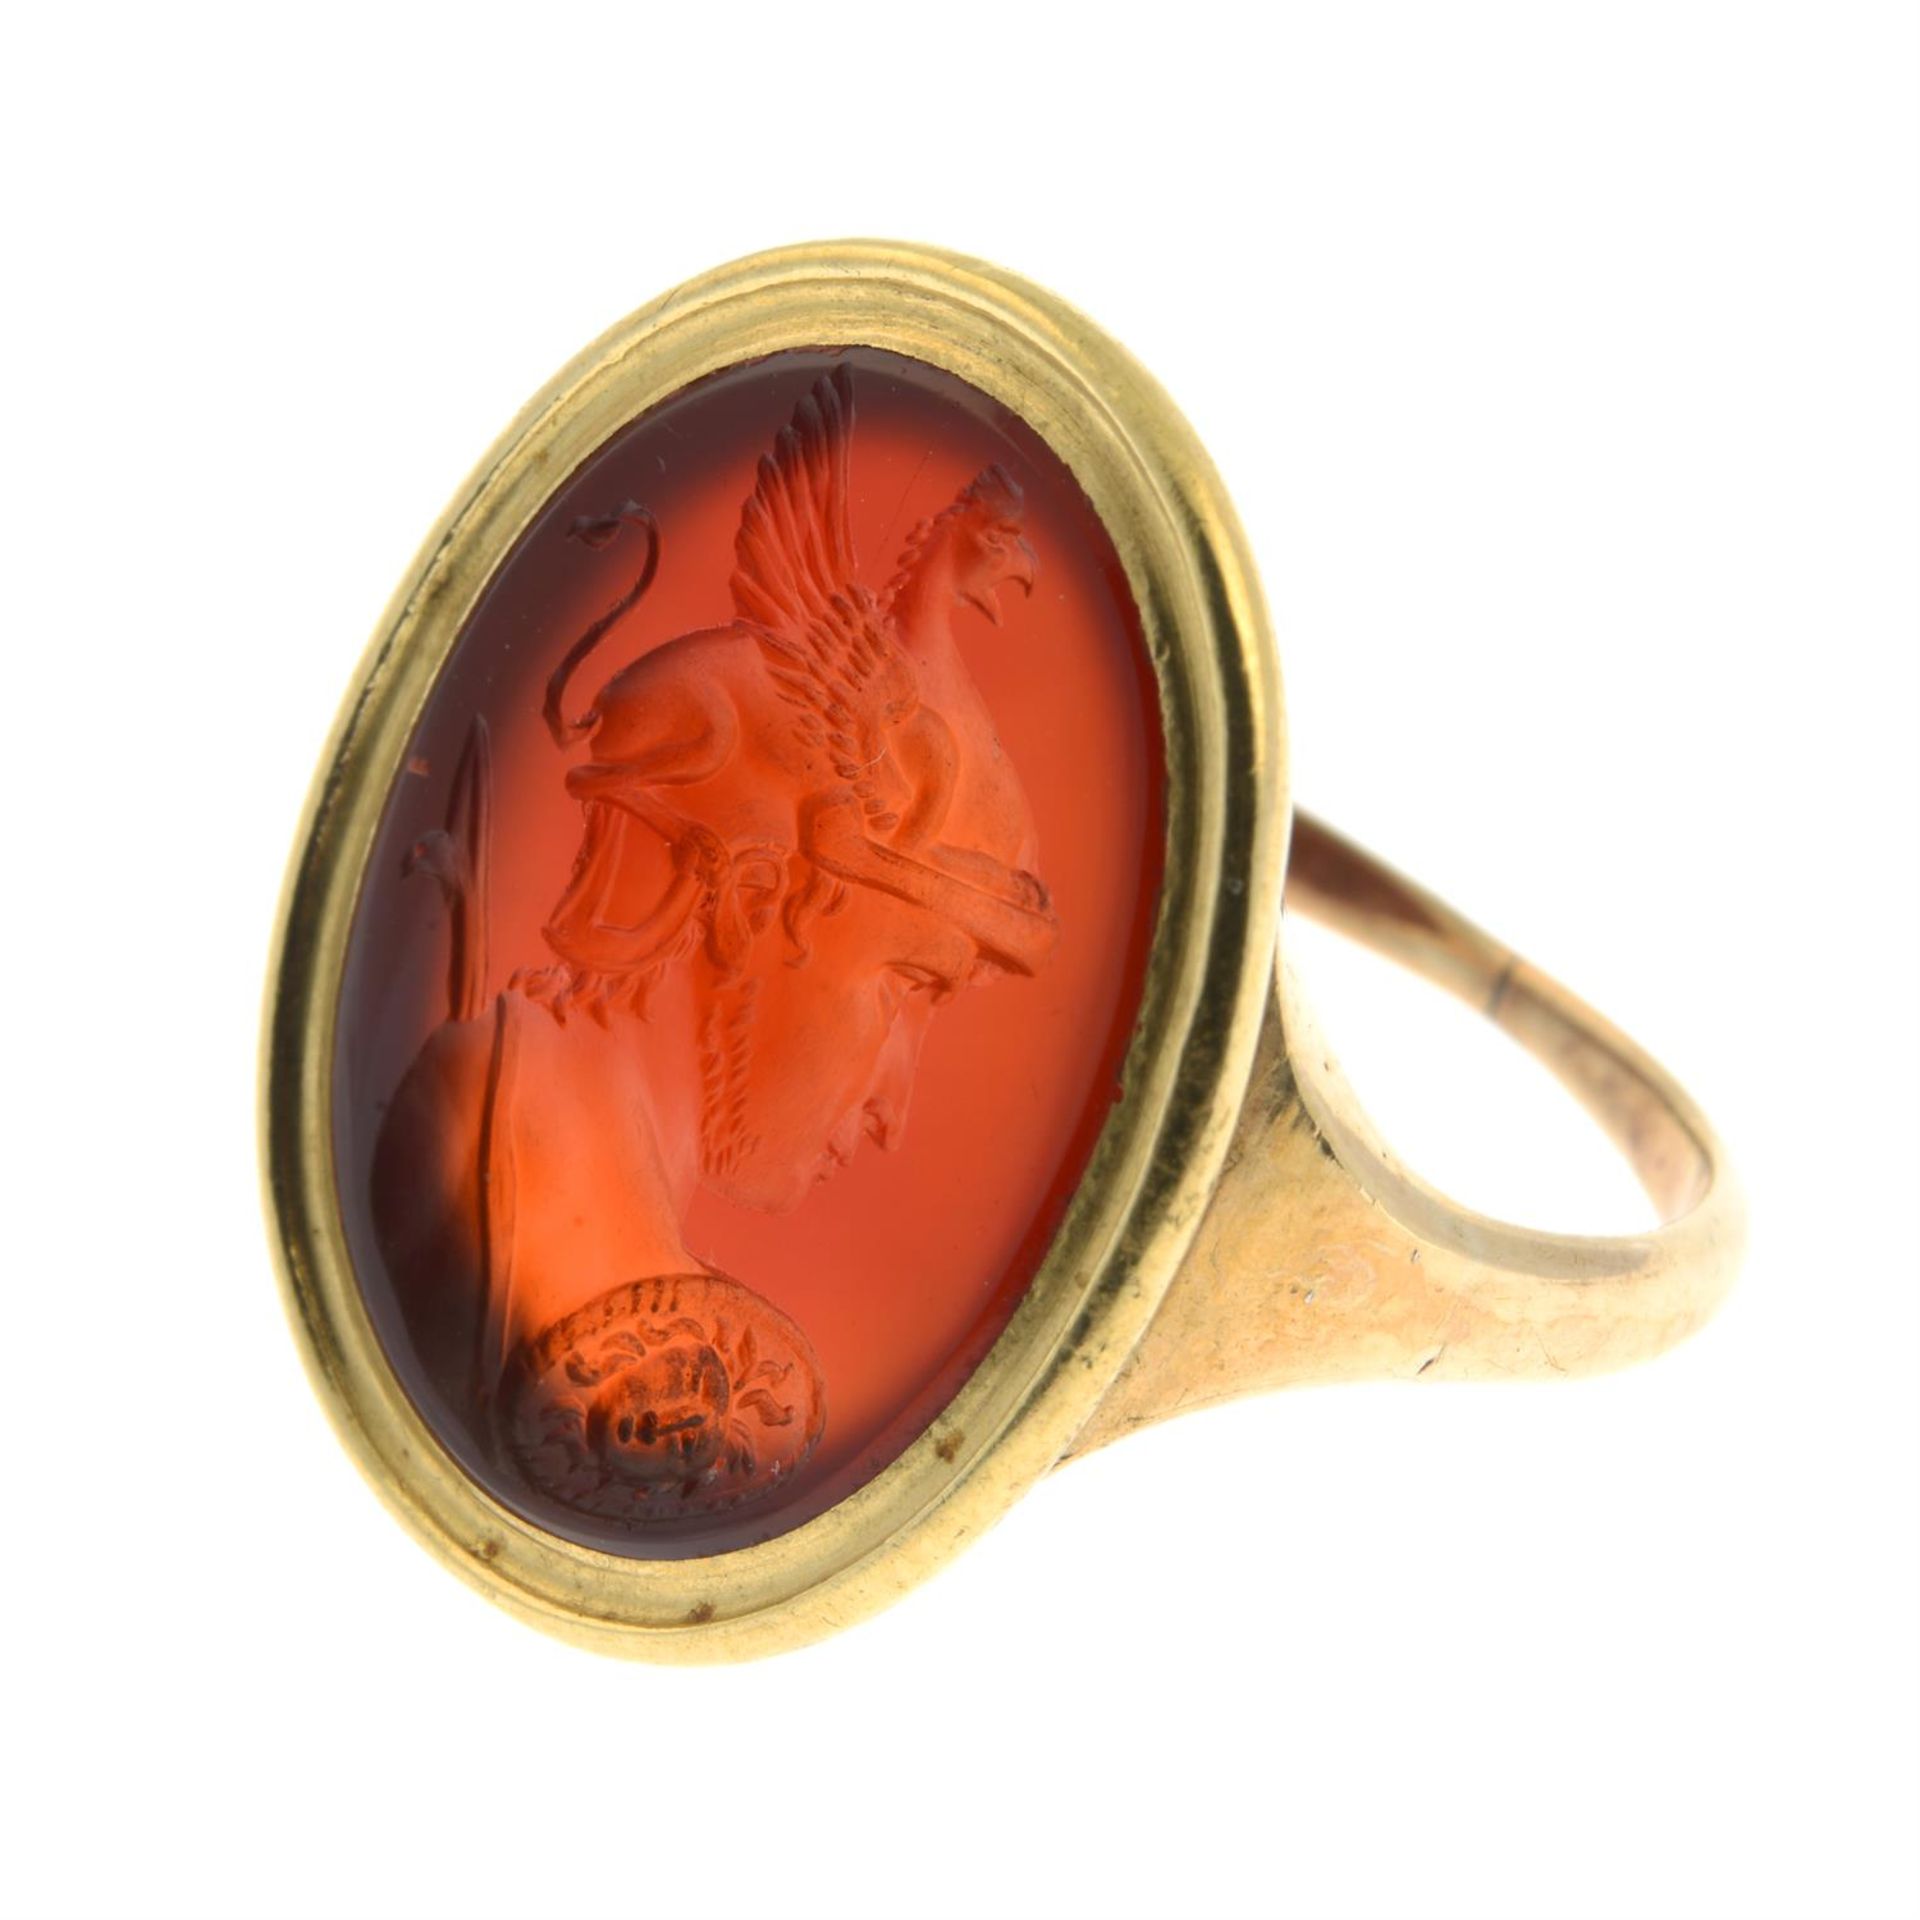 A 19th century gold carnelian intaglio ring, carved to depict Achilles. - Image 5 of 6